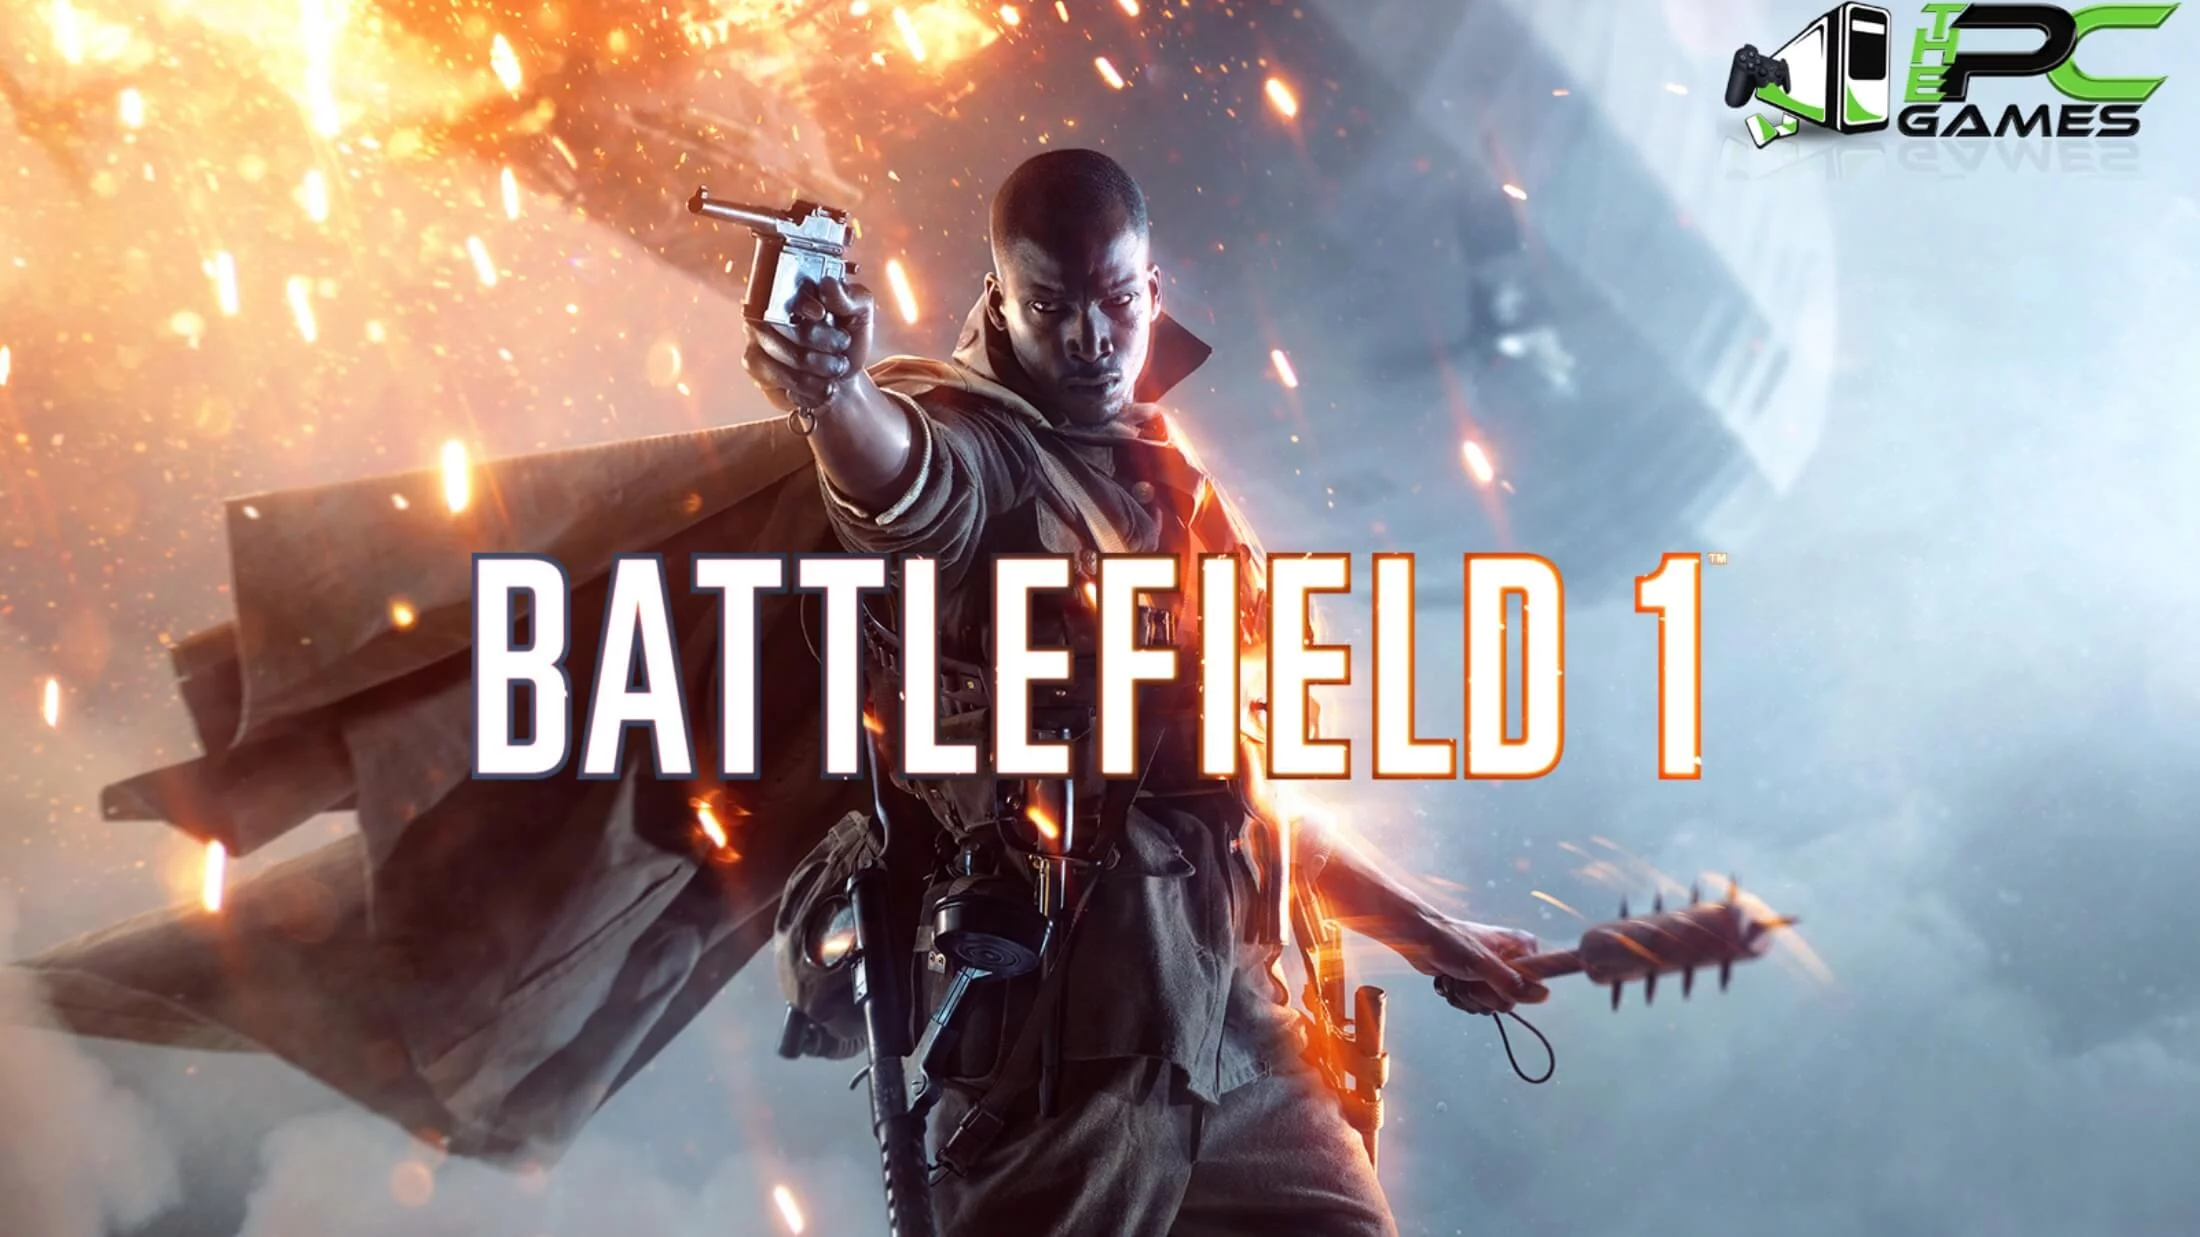 Battlefield 1 PC Game Full version Free Download